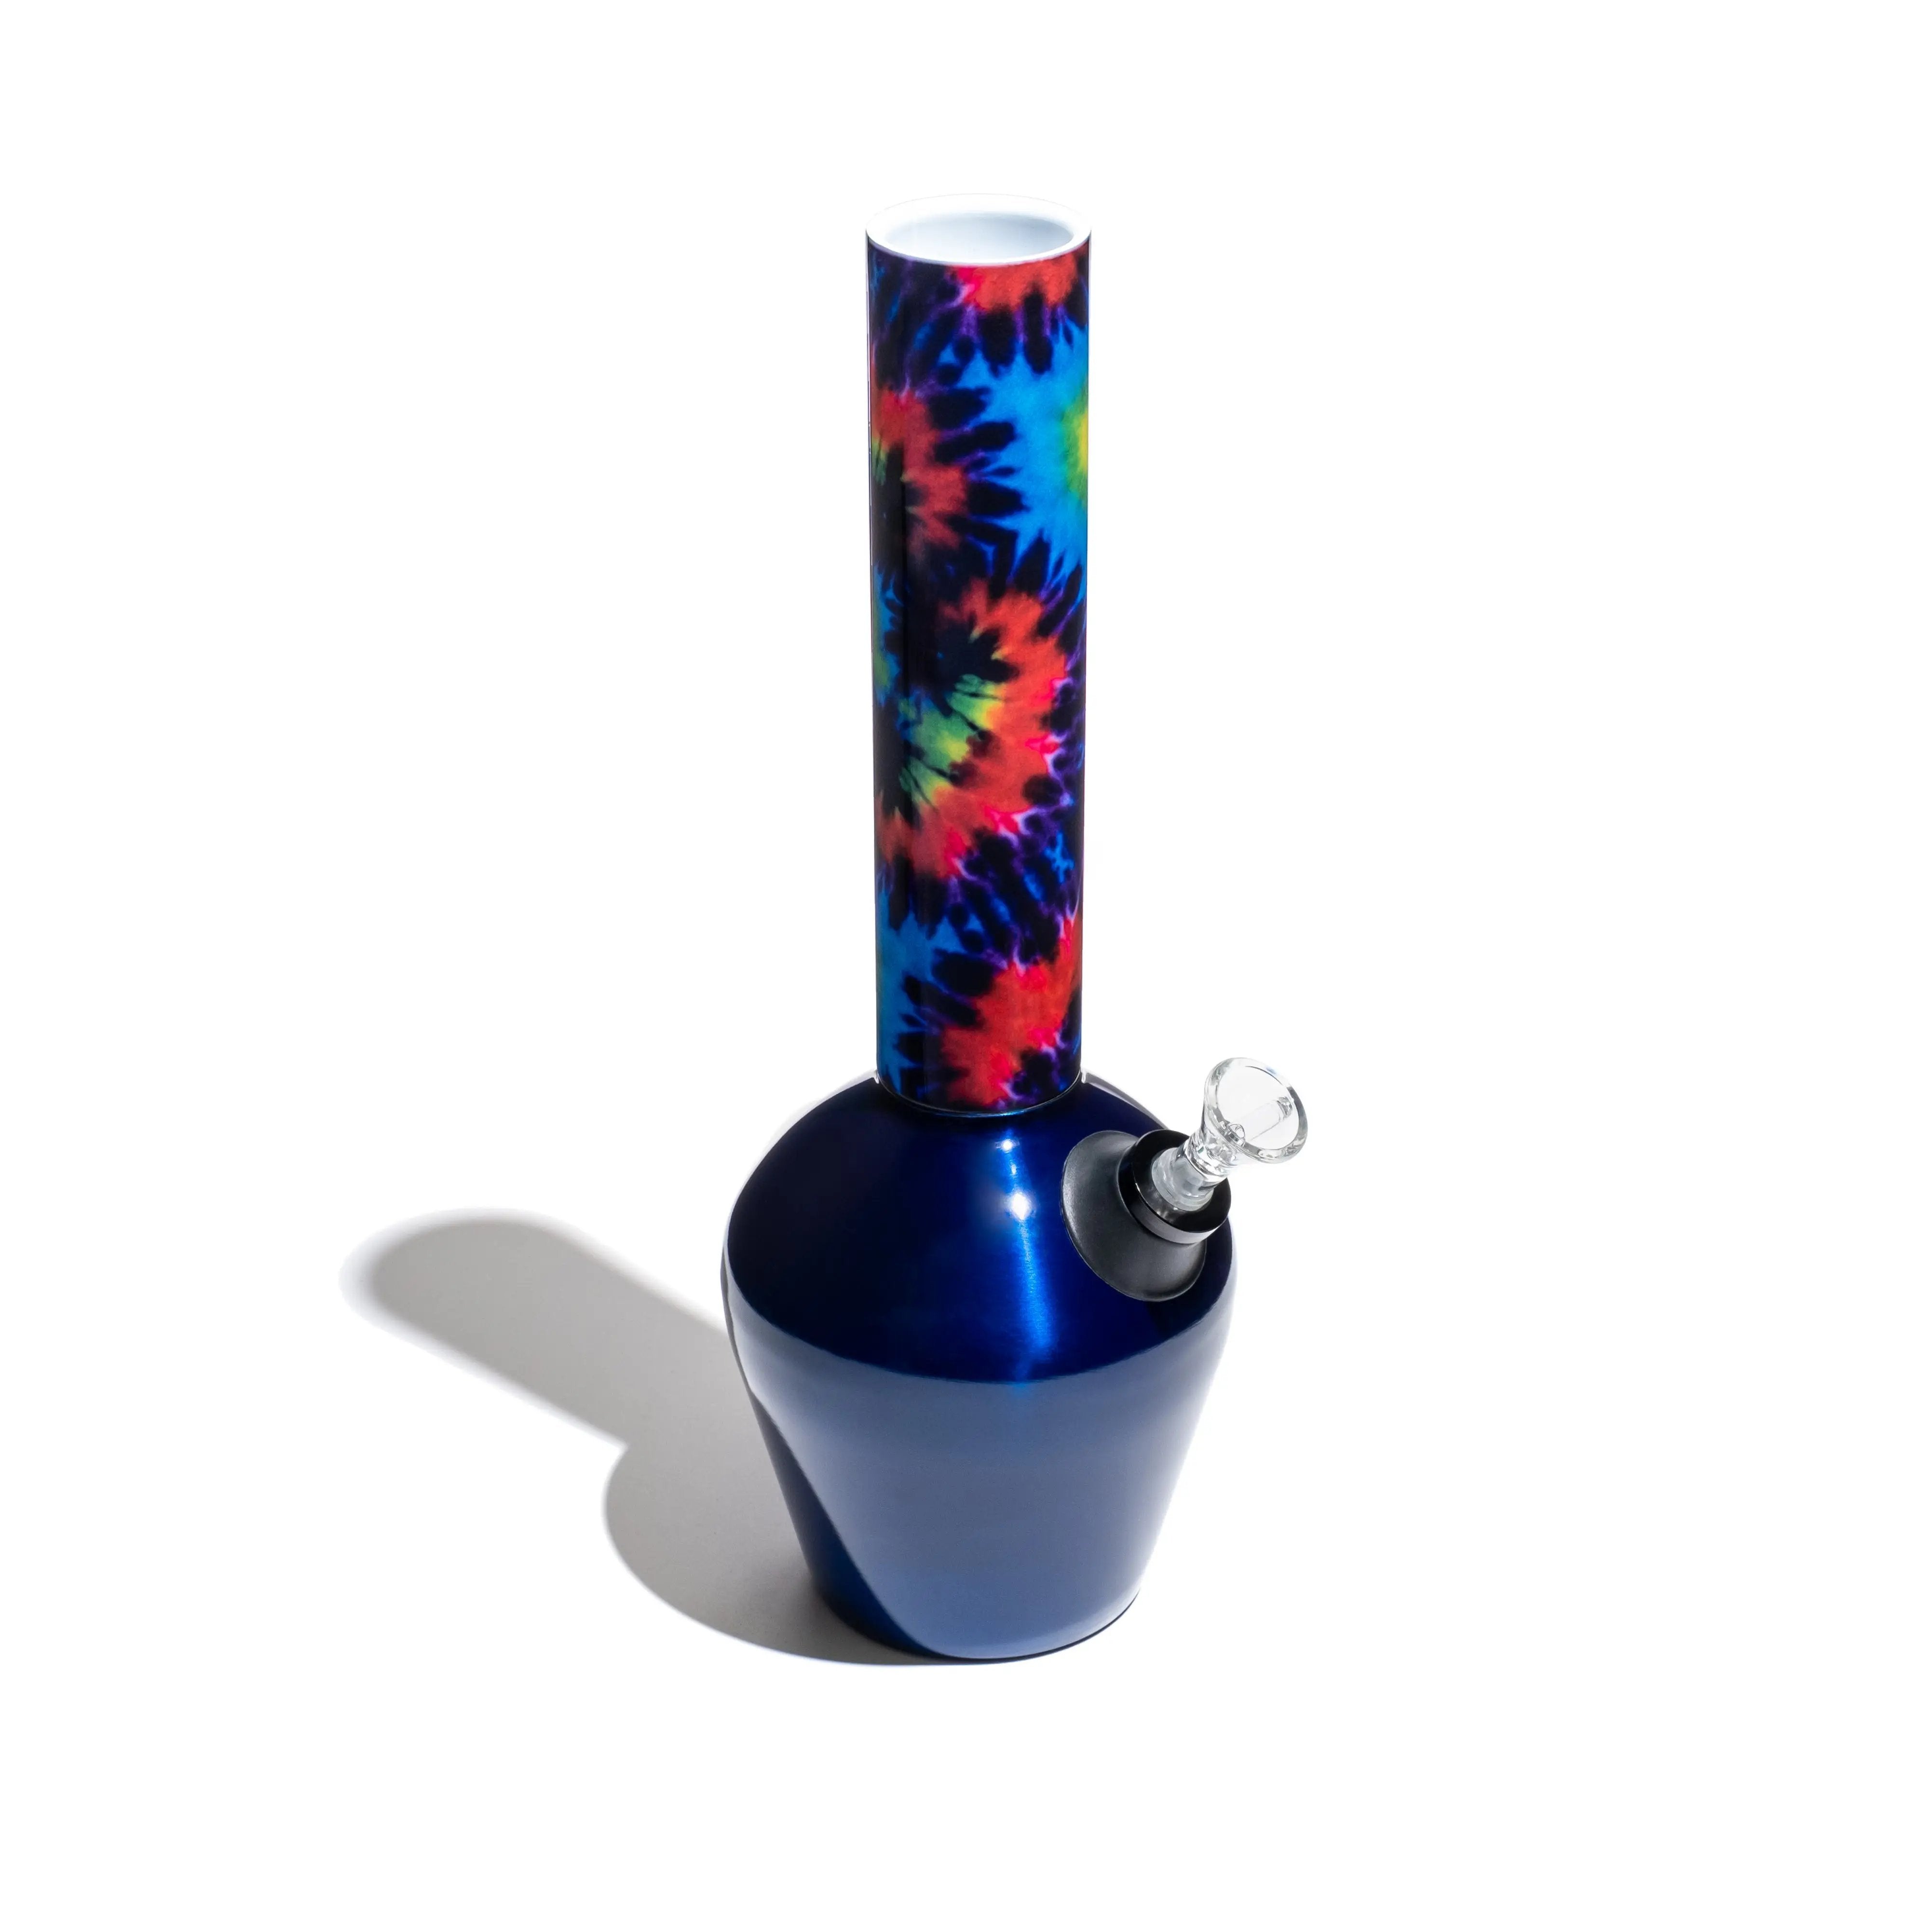 Chill - Mix & Match Series - Gloss Blue Base by Chill Steel Pipes